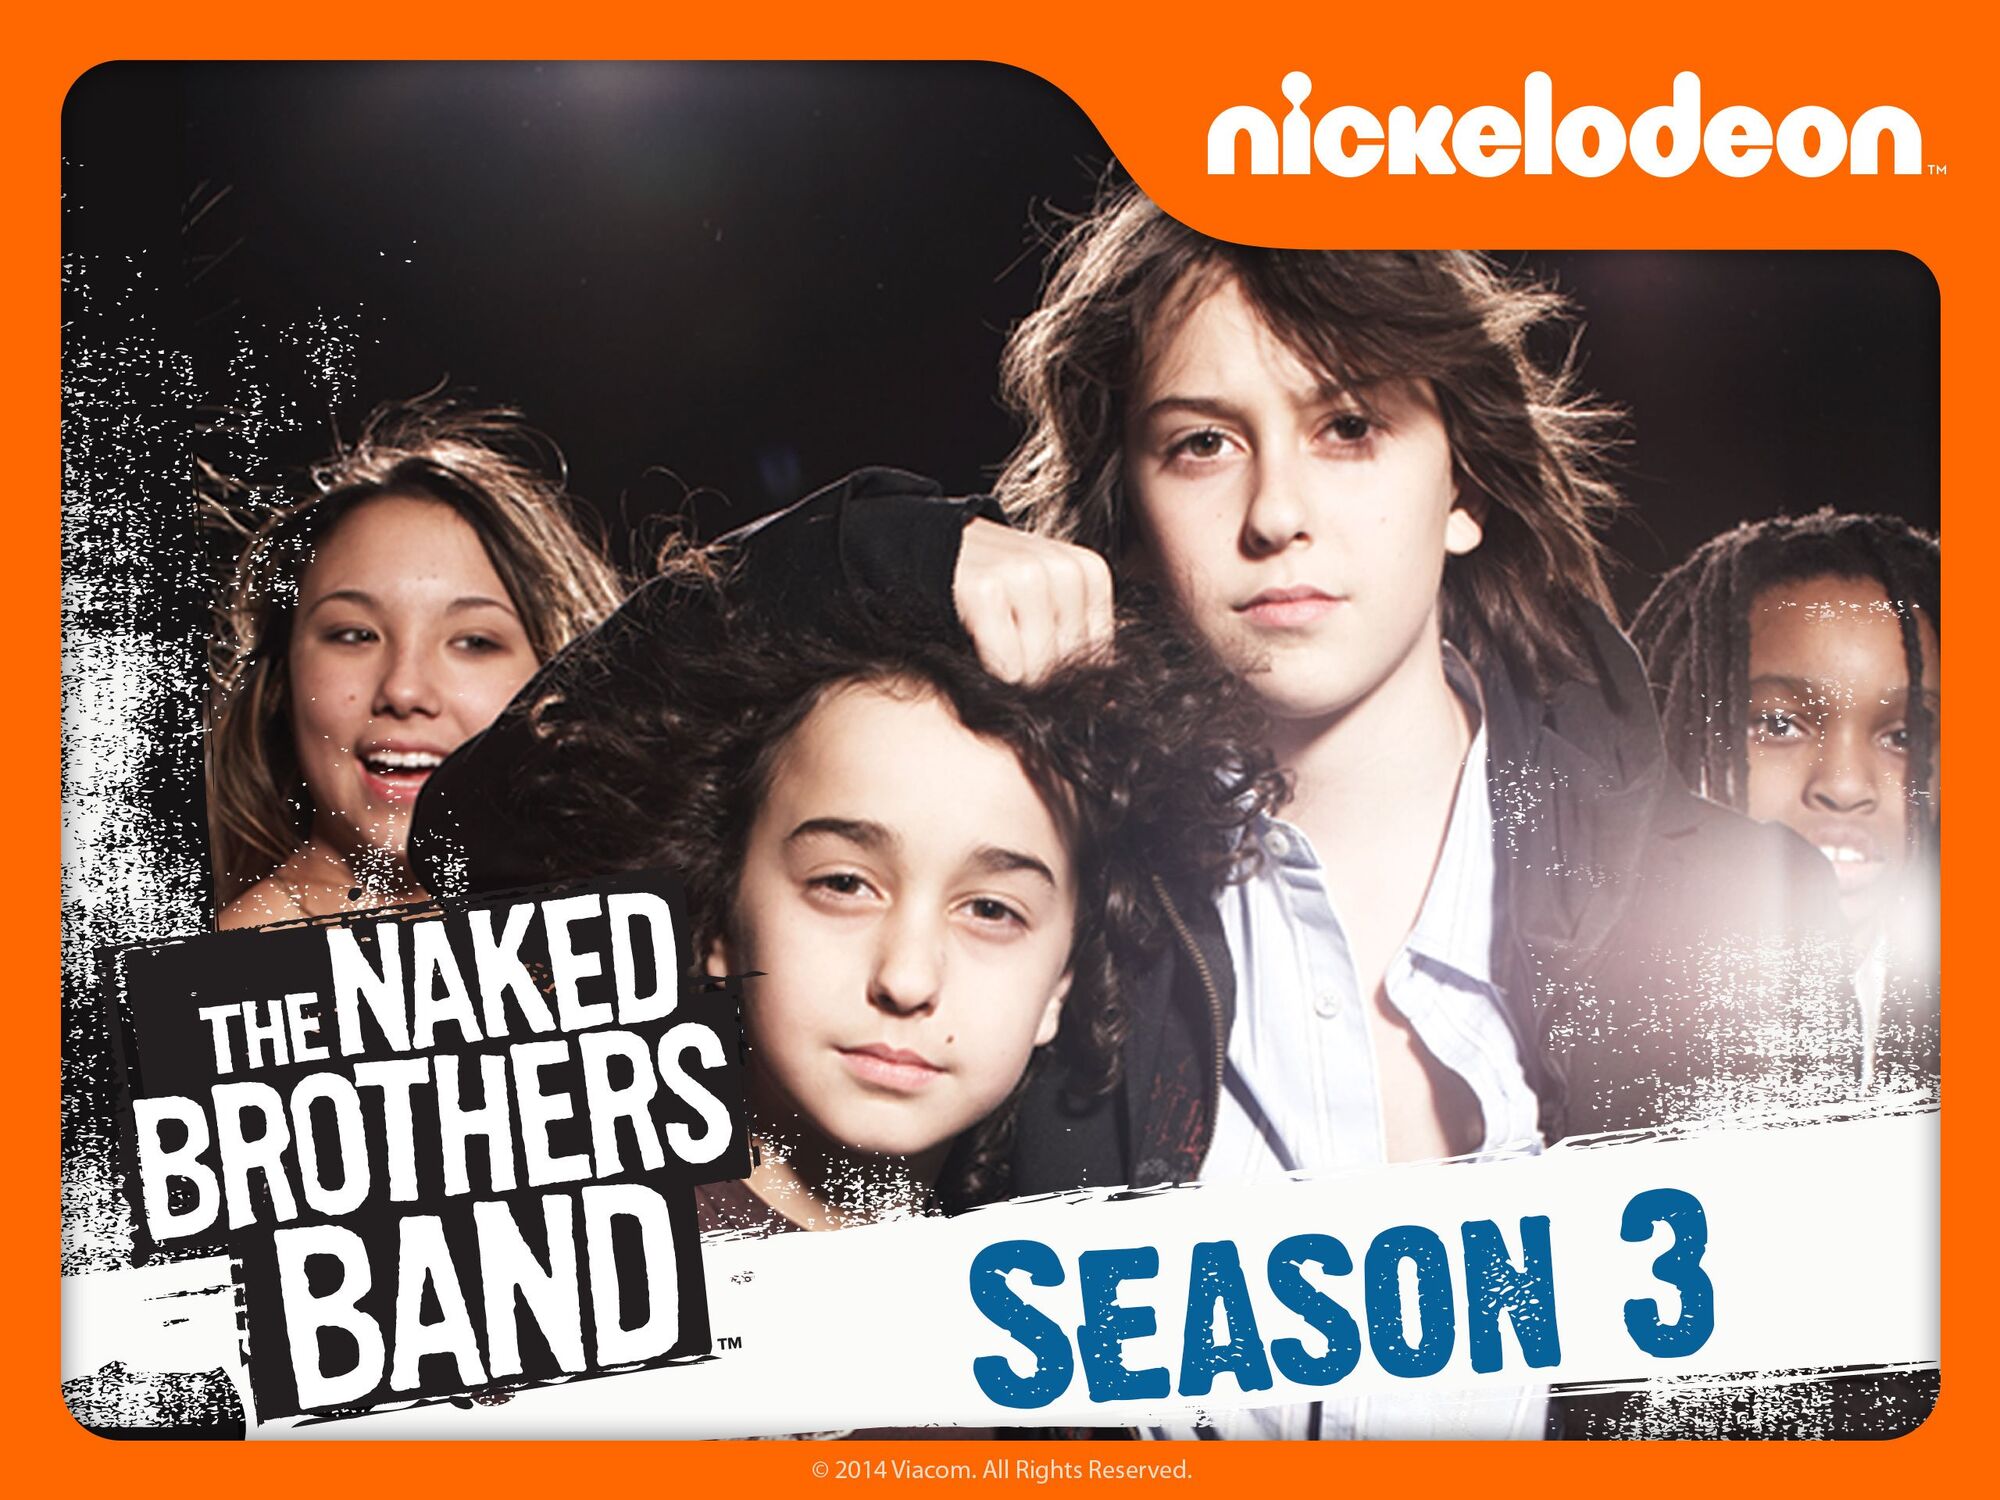 The Naked Brothers Band Season 3 Episode 7